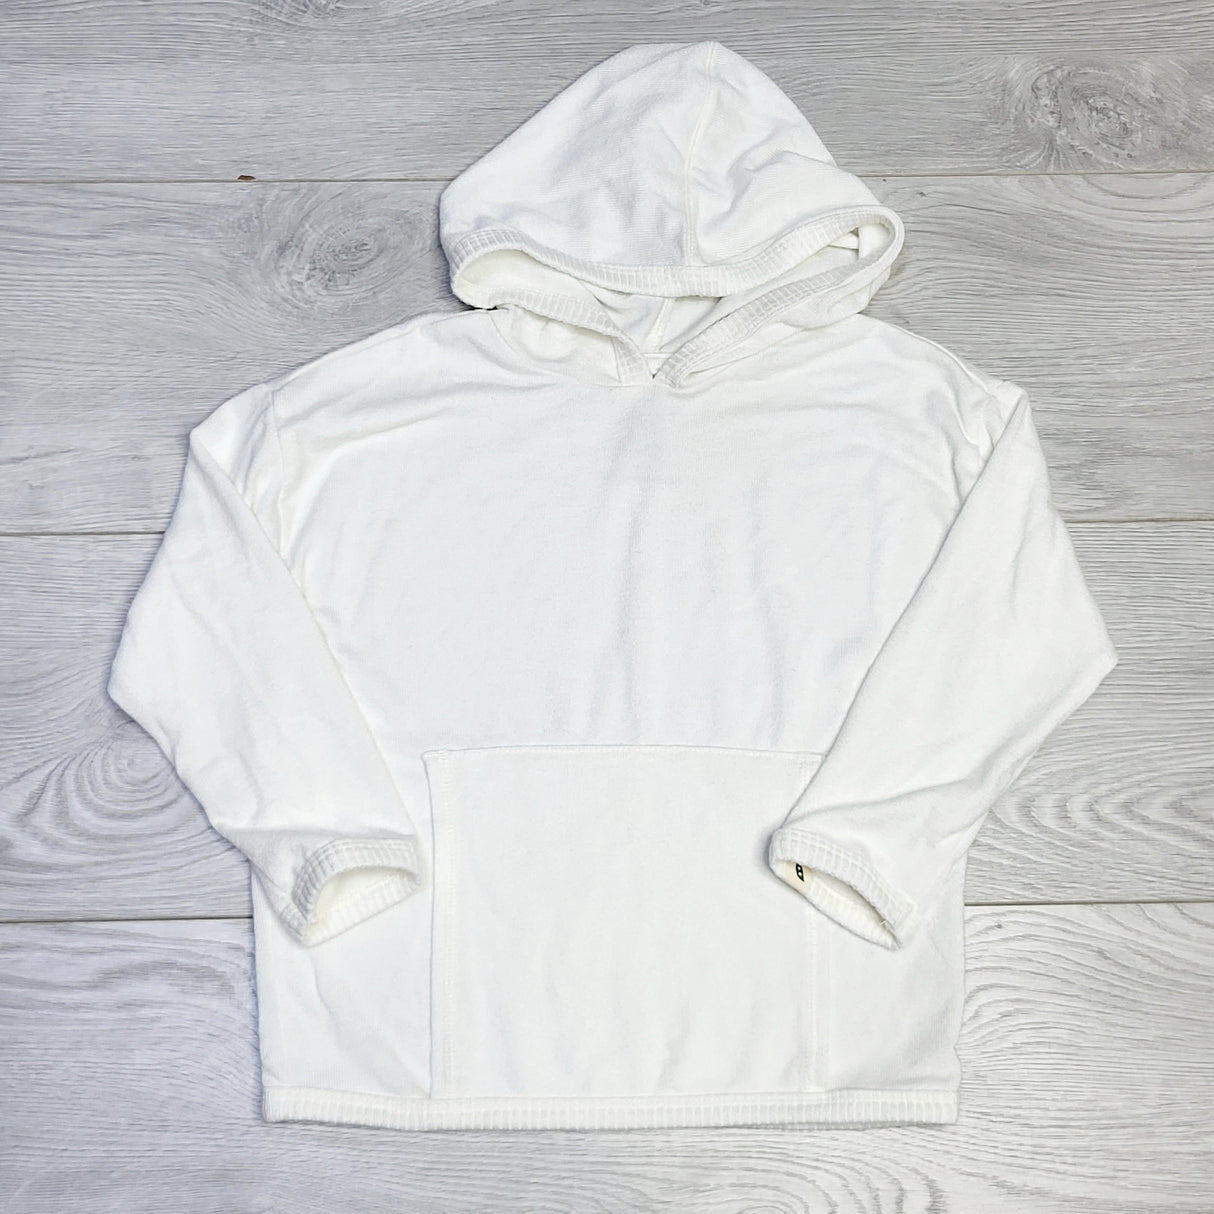 CRTH1 - Easy Peasy white rayonn blend pullover hoodie. Size 4T